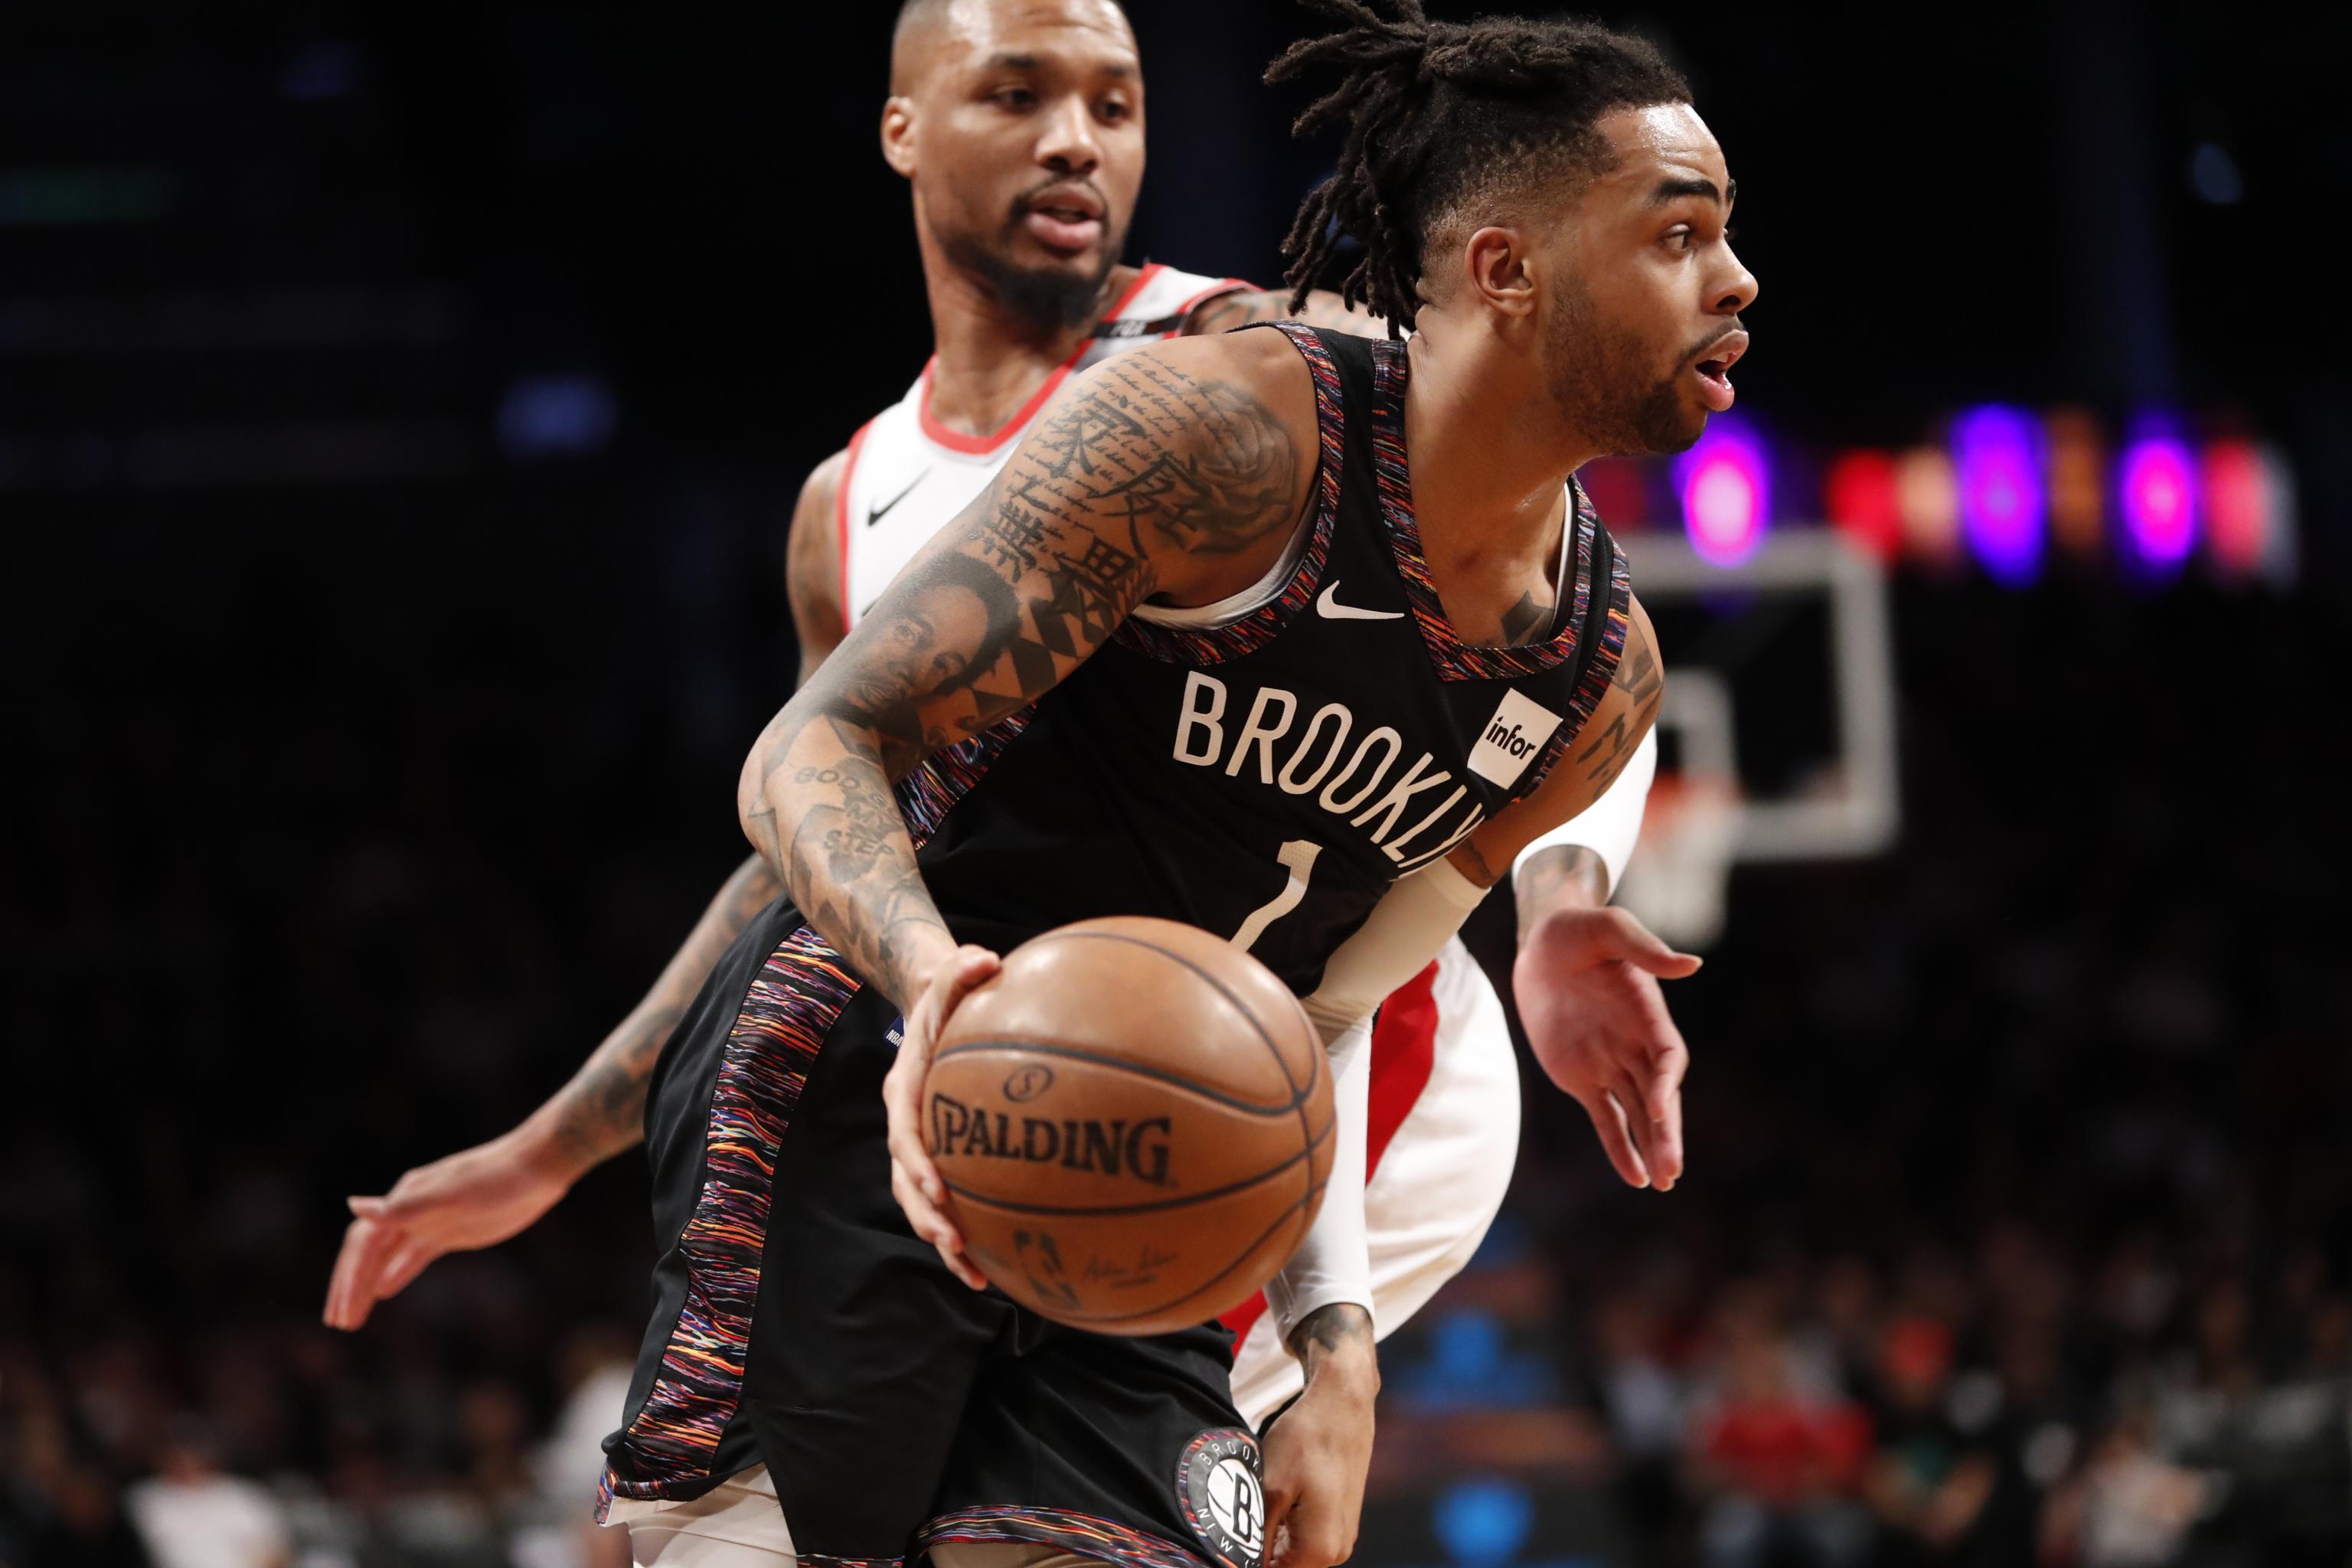 Brooklyn Nets reportedy sued by Coogi over 'City' edition jerseys